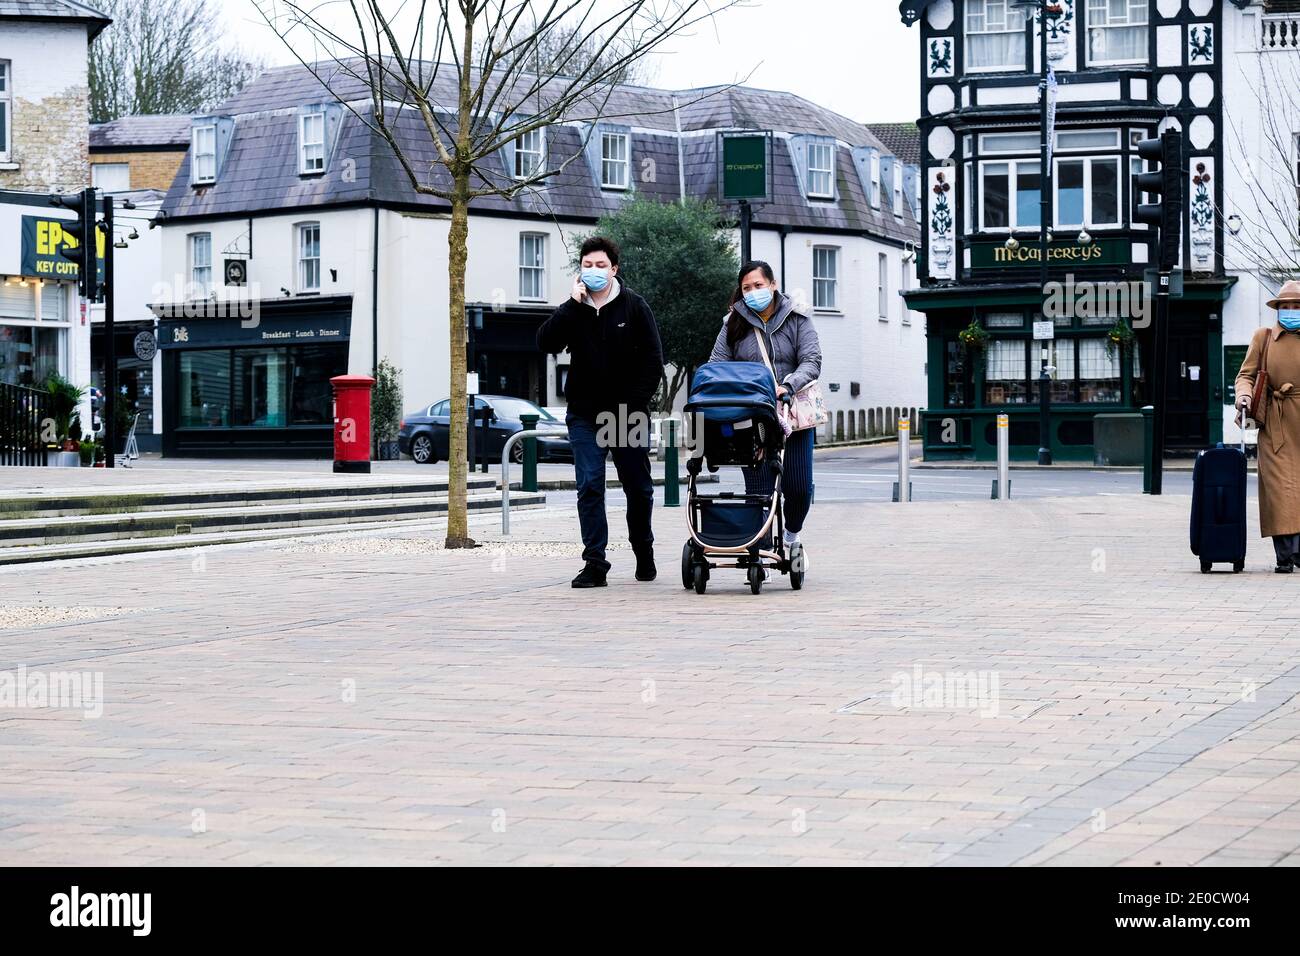 London UK, December 31 2020, Young Asian Couple With A Baby In A Pushchair Wearing Protective Face Masks During COVID-19 Tier 4 Lockdown Stock Photo